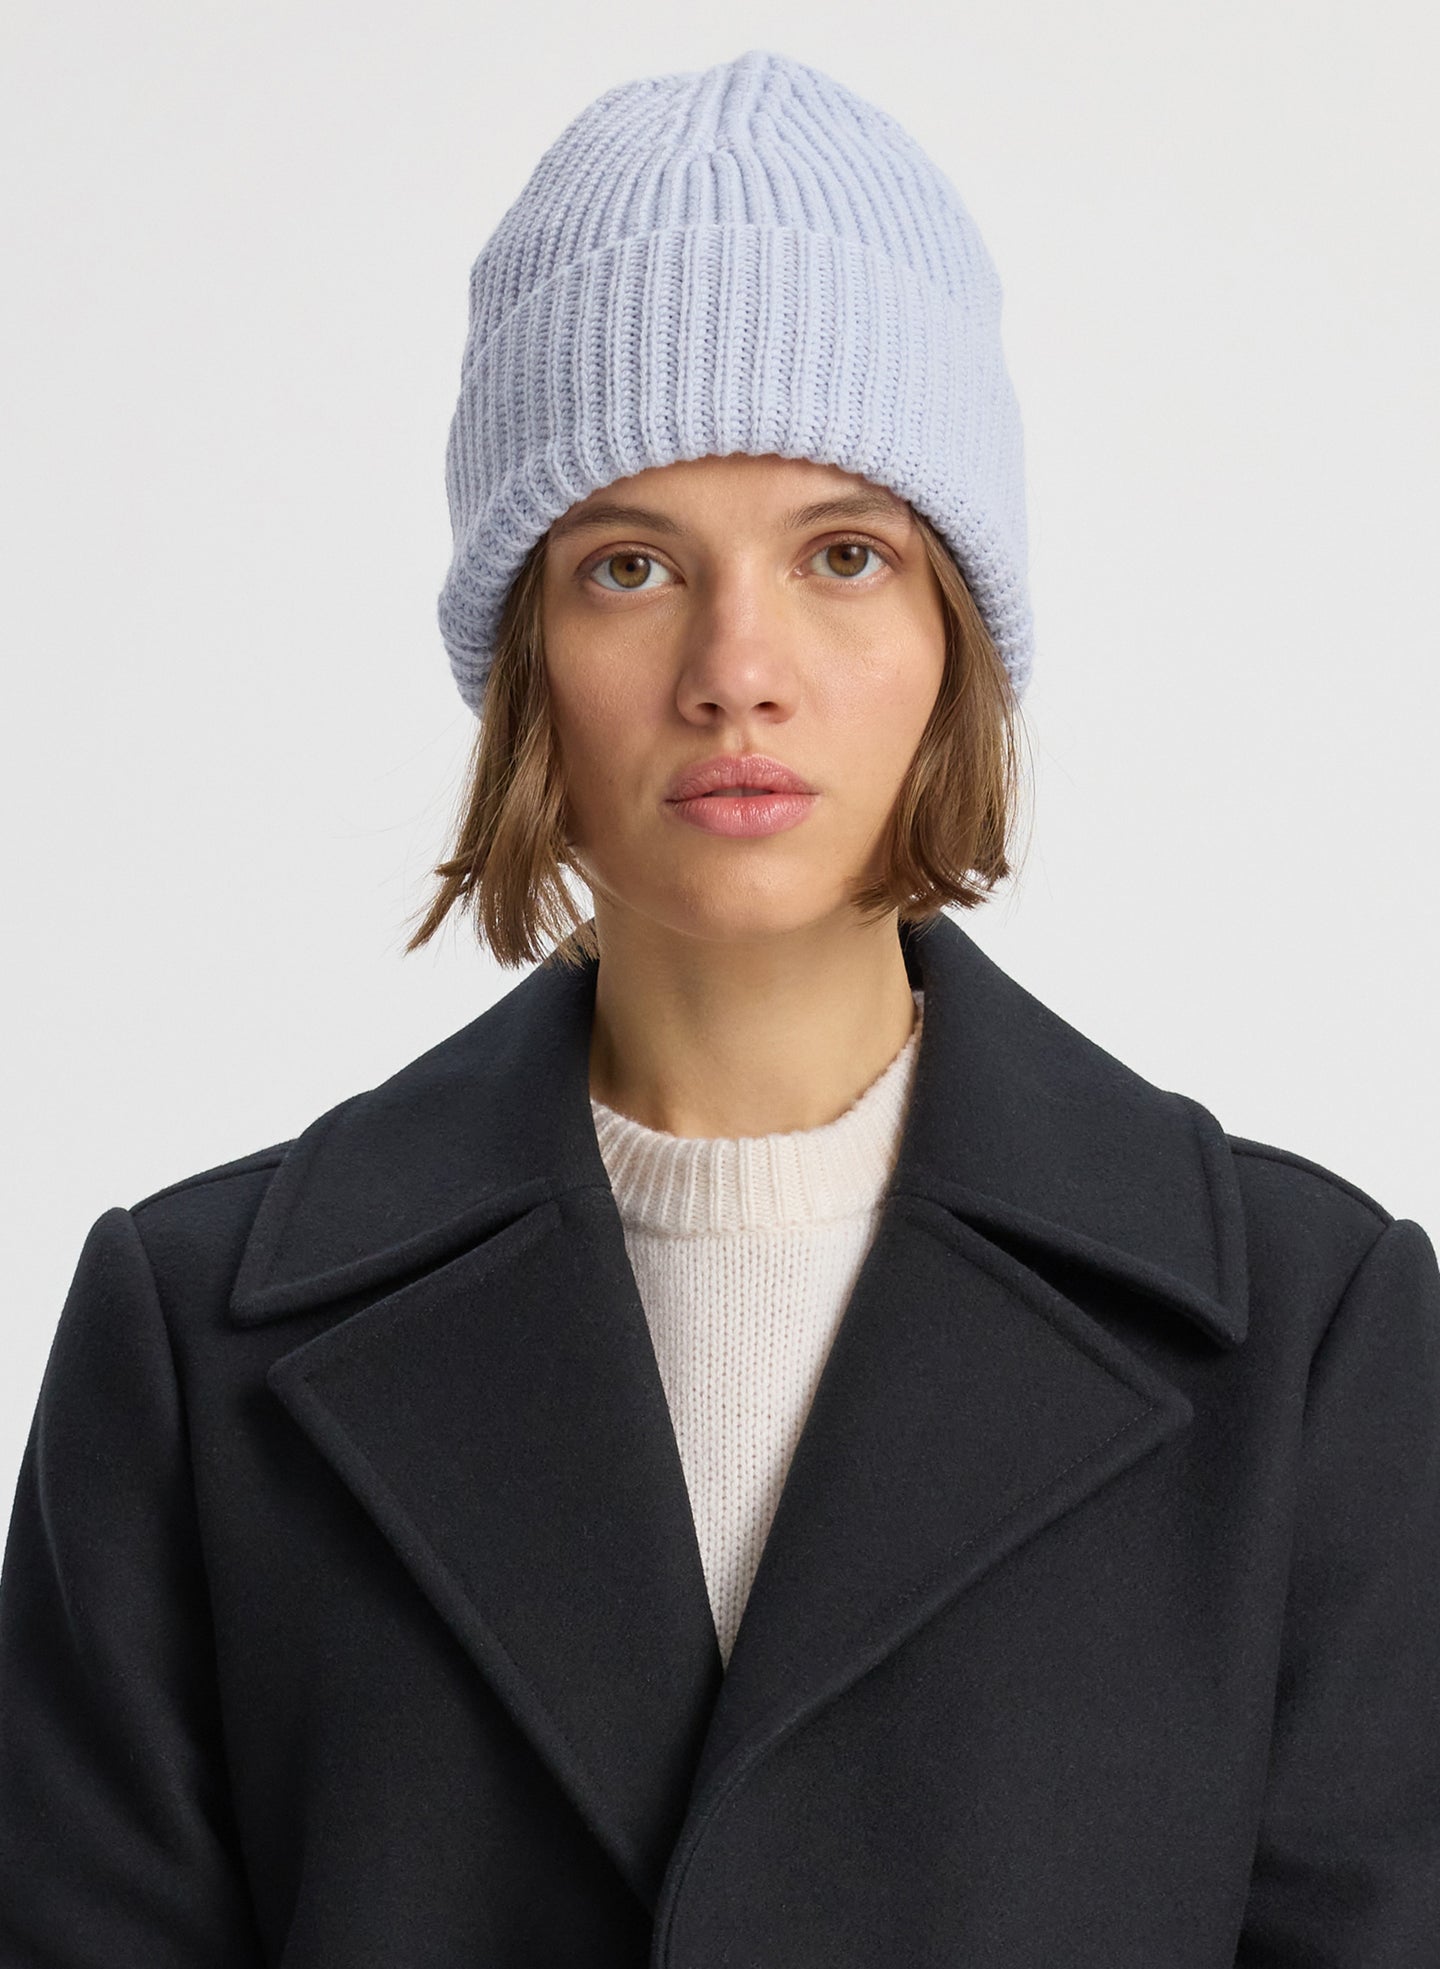 Front view of woman wearing light blue knit beanie